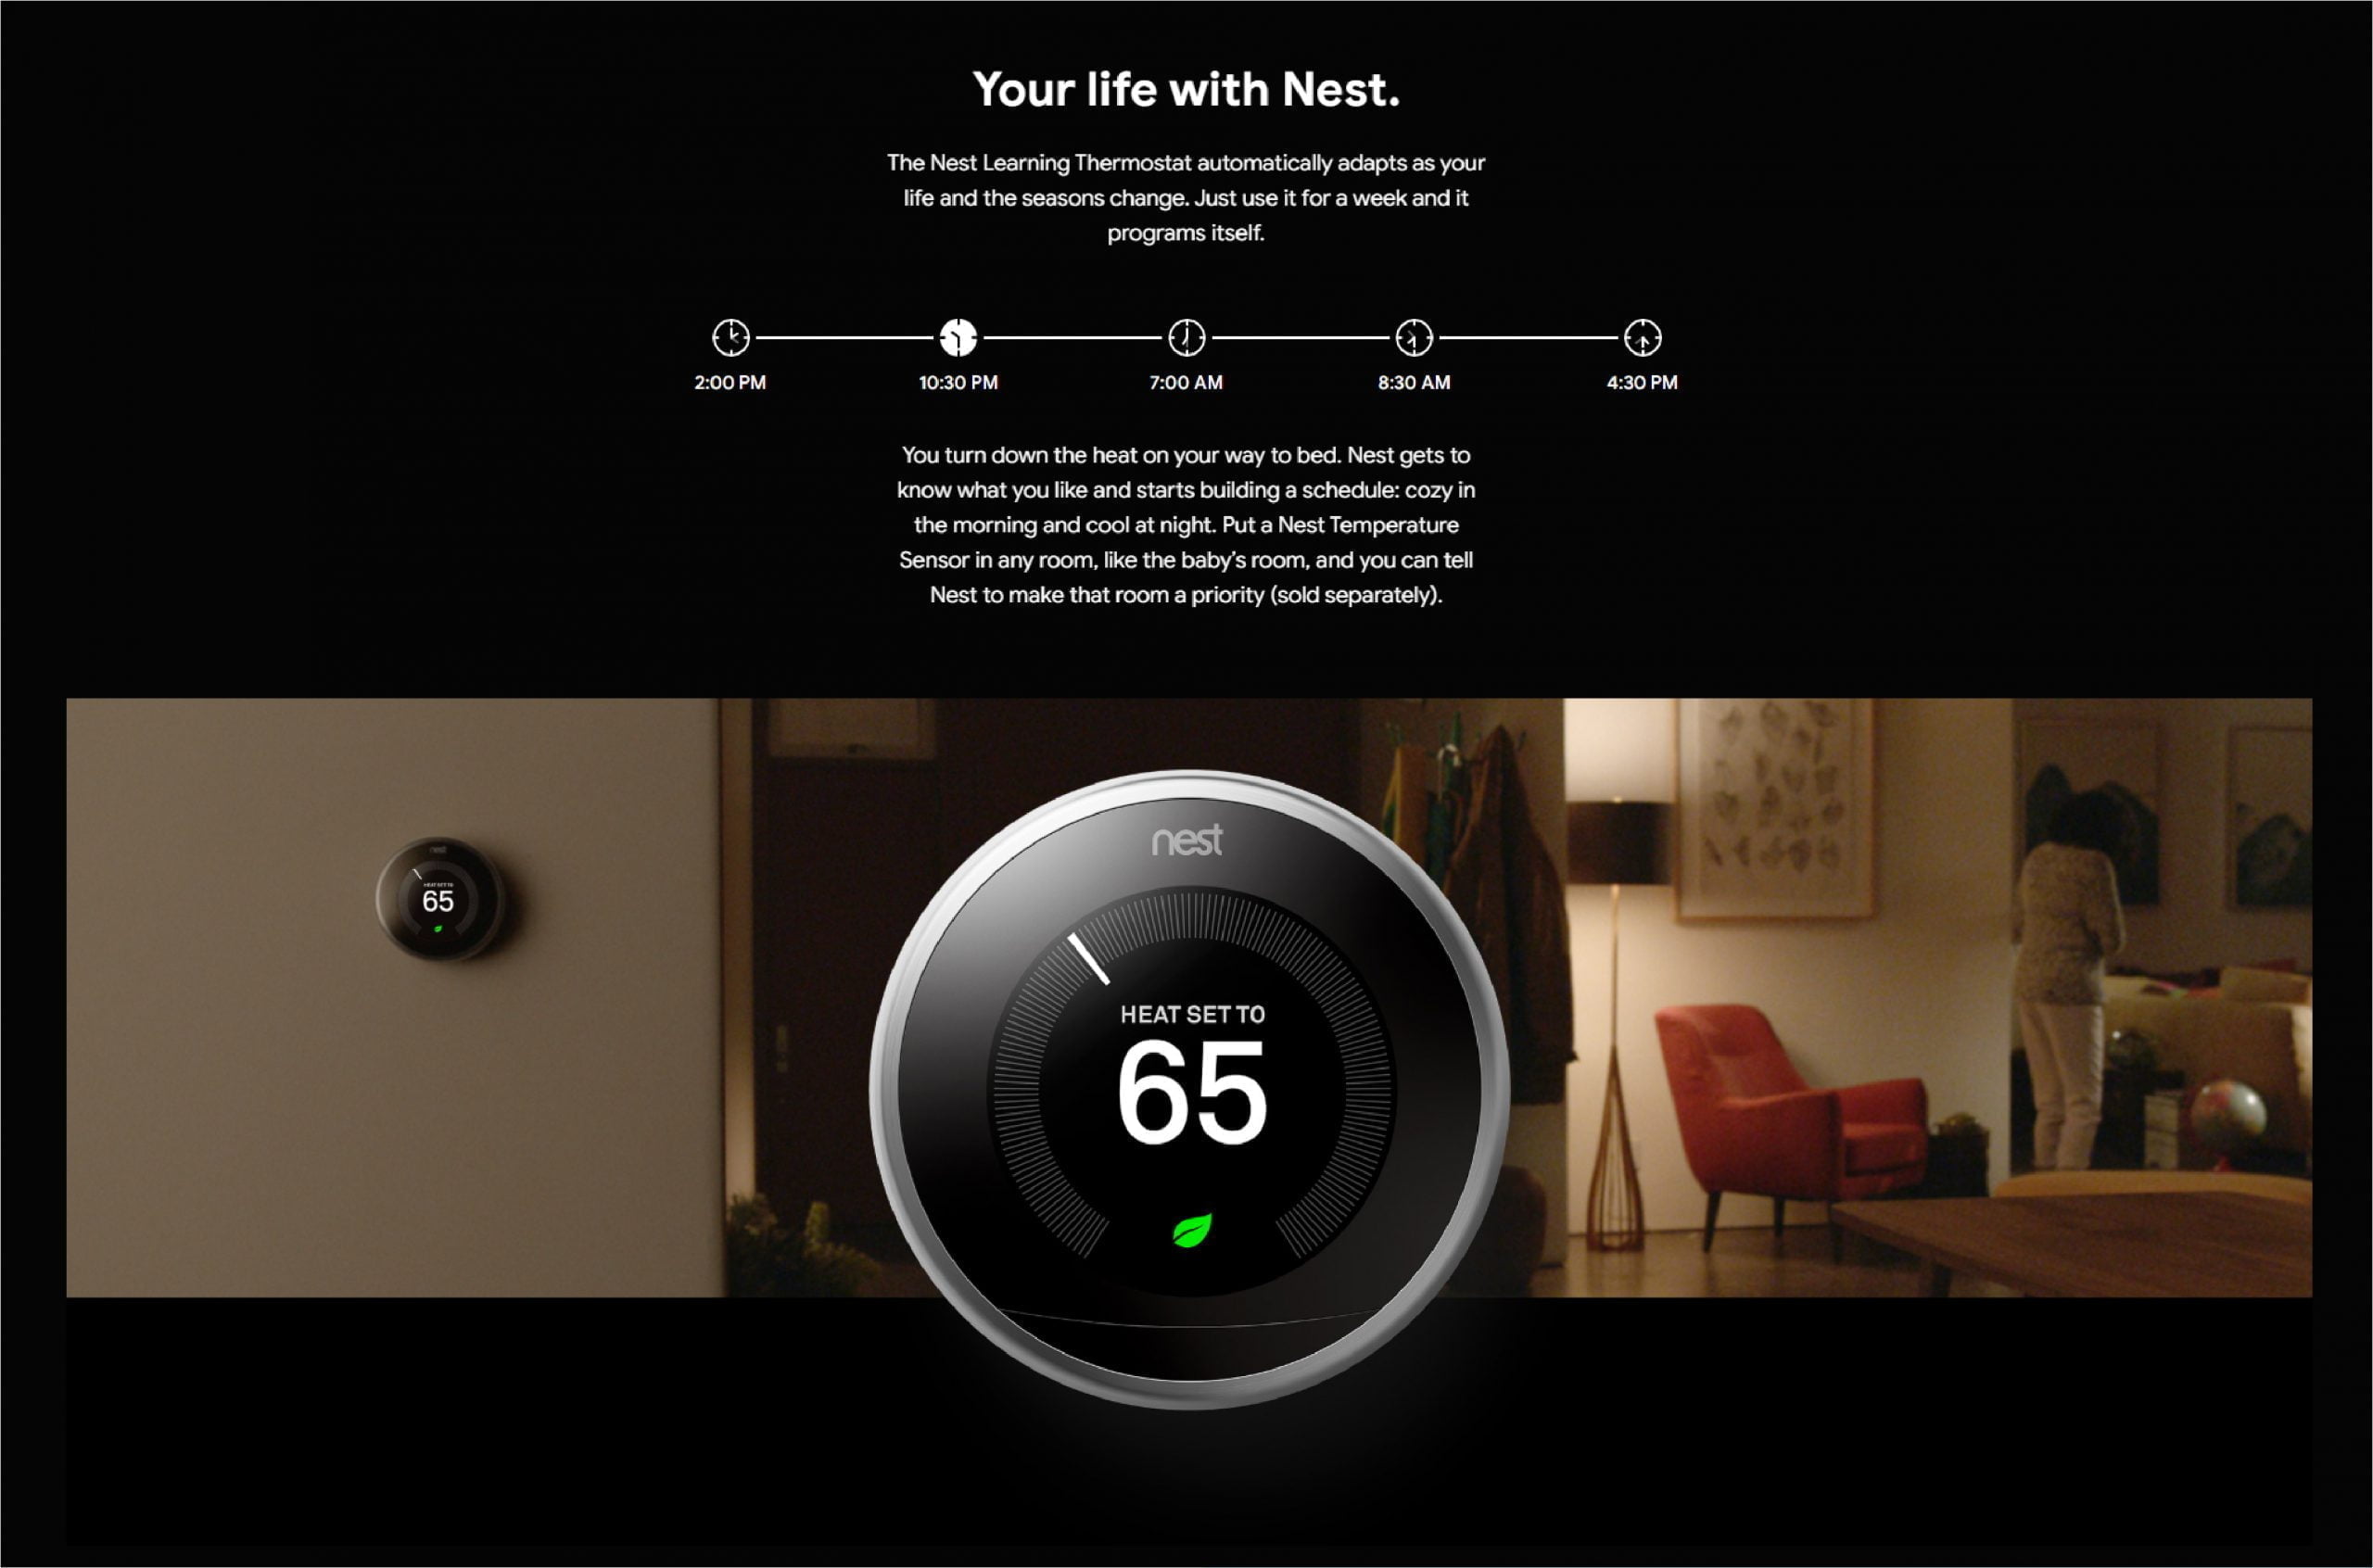 Nest 03 Scaled Google &Lt;H1&Gt;Google Nest Learning Smart Wifi Thermostat 3Rd Gen - T3019Us Polished Steel&Lt;/H1&Gt; &Lt;Ul Class=&Quot;A-Unordered-List A-Vertical A-Spacing-Mini&Quot;&Gt; &Lt;Li&Gt;&Lt;Span Class=&Quot;A-List-Item&Quot;&Gt;Auto-Schedule: No More Confusing Programming. It Learns The Temperatures You Like And Programs Itself.&Lt;/Span&Gt;&Lt;/Li&Gt; &Lt;Li&Gt;&Lt;Span Class=&Quot;A-List-Item&Quot;&Gt;Wi-Fi Thermostat: Connect The Nest Thermostat To Wi-Fi To Change The Temperature From Your Phone, Tablet Or Laptop.&Lt;/Span&Gt;&Lt;/Li&Gt; &Lt;Li&Gt;&Lt;Span Class=&Quot;A-List-Item&Quot;&Gt;Energy Saving: You’ll See The Nest Leaf When You Choose A Temperature That Saves Energy. It Guides You In The Right Direction.&Lt;/Span&Gt;&Lt;/Li&Gt; &Lt;Li&Gt;&Lt;Span Class=&Quot;A-List-Item&Quot;&Gt;Smart Thermostat: Early-On Nest Learns How Your Home Warms Up And Keeps An Eye On The Weather To Get You The Temperature You Want When You Want It.&Lt;/Span&Gt;&Lt;/Li&Gt; &Lt;Li&Gt;&Lt;Span Class=&Quot;A-List-Item&Quot;&Gt;Home/Away Assist: The Nest Thermostat Automatically Turns Itself Down When You’re Away To Avoid Heating Or Cooling An Empty Home.&Lt;/Span&Gt;&Lt;/Li&Gt; &Lt;Li&Gt;&Lt;Span Class=&Quot;A-List-Item&Quot;&Gt;Works With Amazon Alexa For Voice Control (Alexa Device Sold Separately)&Lt;/Span&Gt;&Lt;/Li&Gt; &Lt;Li&Gt;&Lt;Span Class=&Quot;A-List-Item&Quot;&Gt;&Lt;Span Class=&Quot;A-List-Item&Quot;&Gt;Auto-Schedule: Nest Learns The Temperatures You Like And Programs Itself In About A Week.&Lt;/Span&Gt;&Lt;/Span&Gt; &Lt;H5&Gt;Note : Direct Replacement Warranty One Year&Lt;/H5&Gt; &Lt;Div Class=&Quot;Html-Fragment&Quot;&Gt; &Lt;Div&Gt; &Lt;B&Gt;We Also Provide International Wholesale And Retail Shipping To All Gcc Countries: Saudi Arabia, Qatar, Oman, Kuwait, Bahrain.&Lt;/B&Gt; &Lt;/Div&Gt; &Lt;/Div&Gt;&Lt;/Li&Gt; &Lt;/Ul&Gt; &Lt;Div Class=&Quot;A-Row A-Expander-Container A-Expander-Inline-Container&Quot; Aria-Live=&Quot;Polite&Quot;&Gt; &Lt;Div Class=&Quot;A-Expander-Content A-Expander-Extend-Content A-Expander-Content-Expanded&Quot; Aria-Expanded=&Quot;True&Quot;&Gt;&Lt;/Div&Gt; &Lt;/Div&Gt; Google Nest Google Nest Learning Smart Wifi Thermostat 3Rd Gen - T3019Us Polished Steel